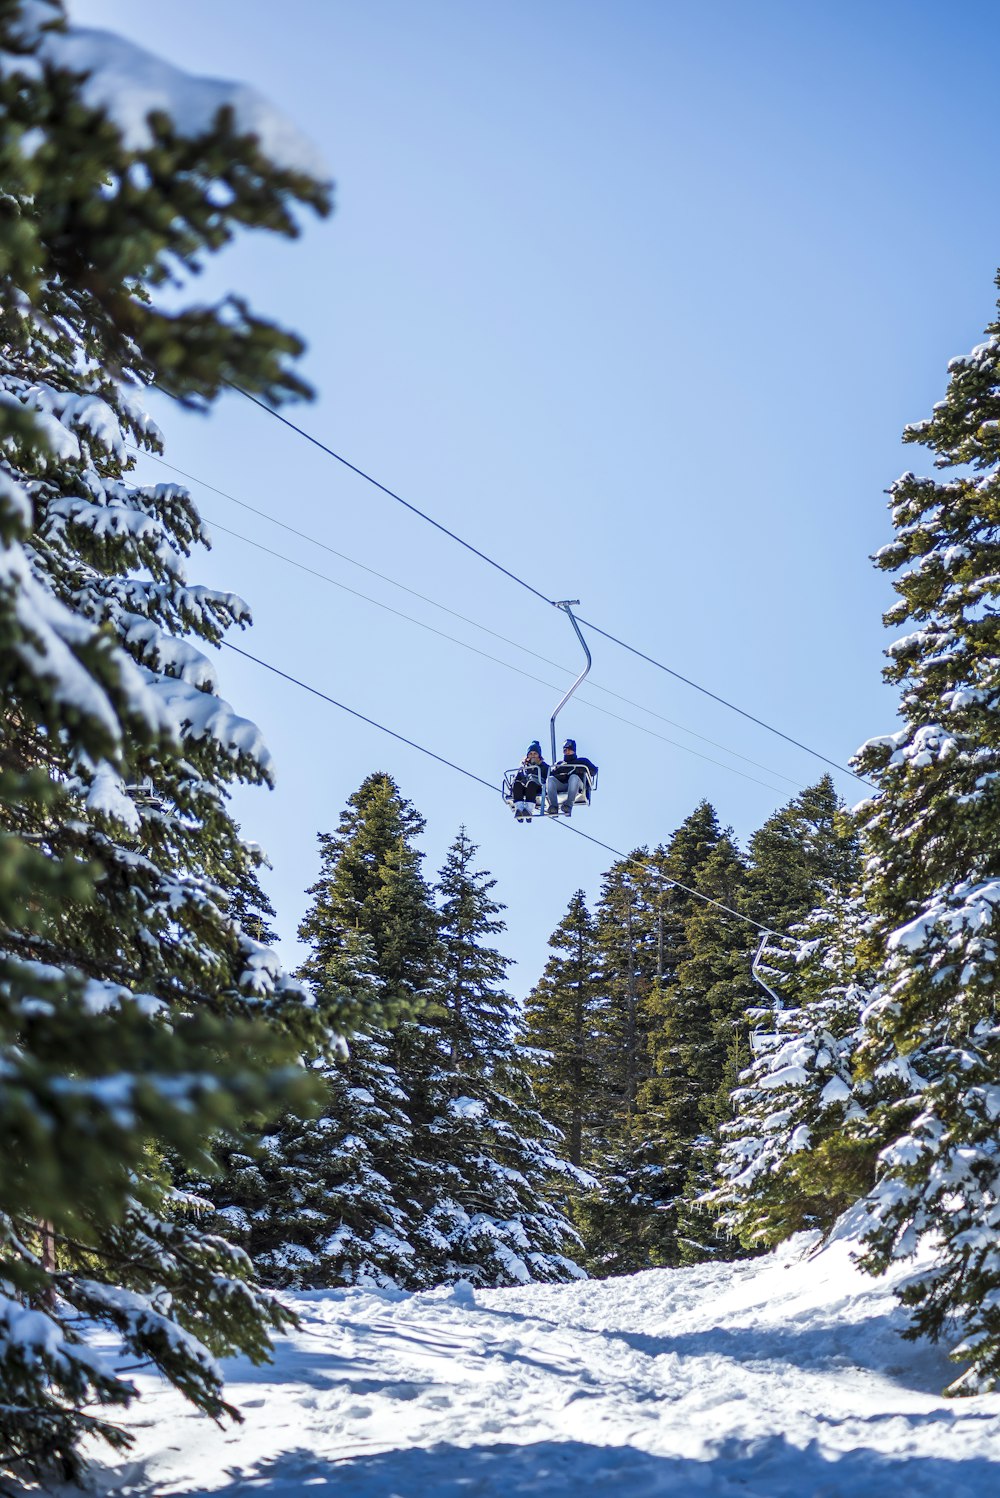 a person riding a ski lift over a snow covered forest